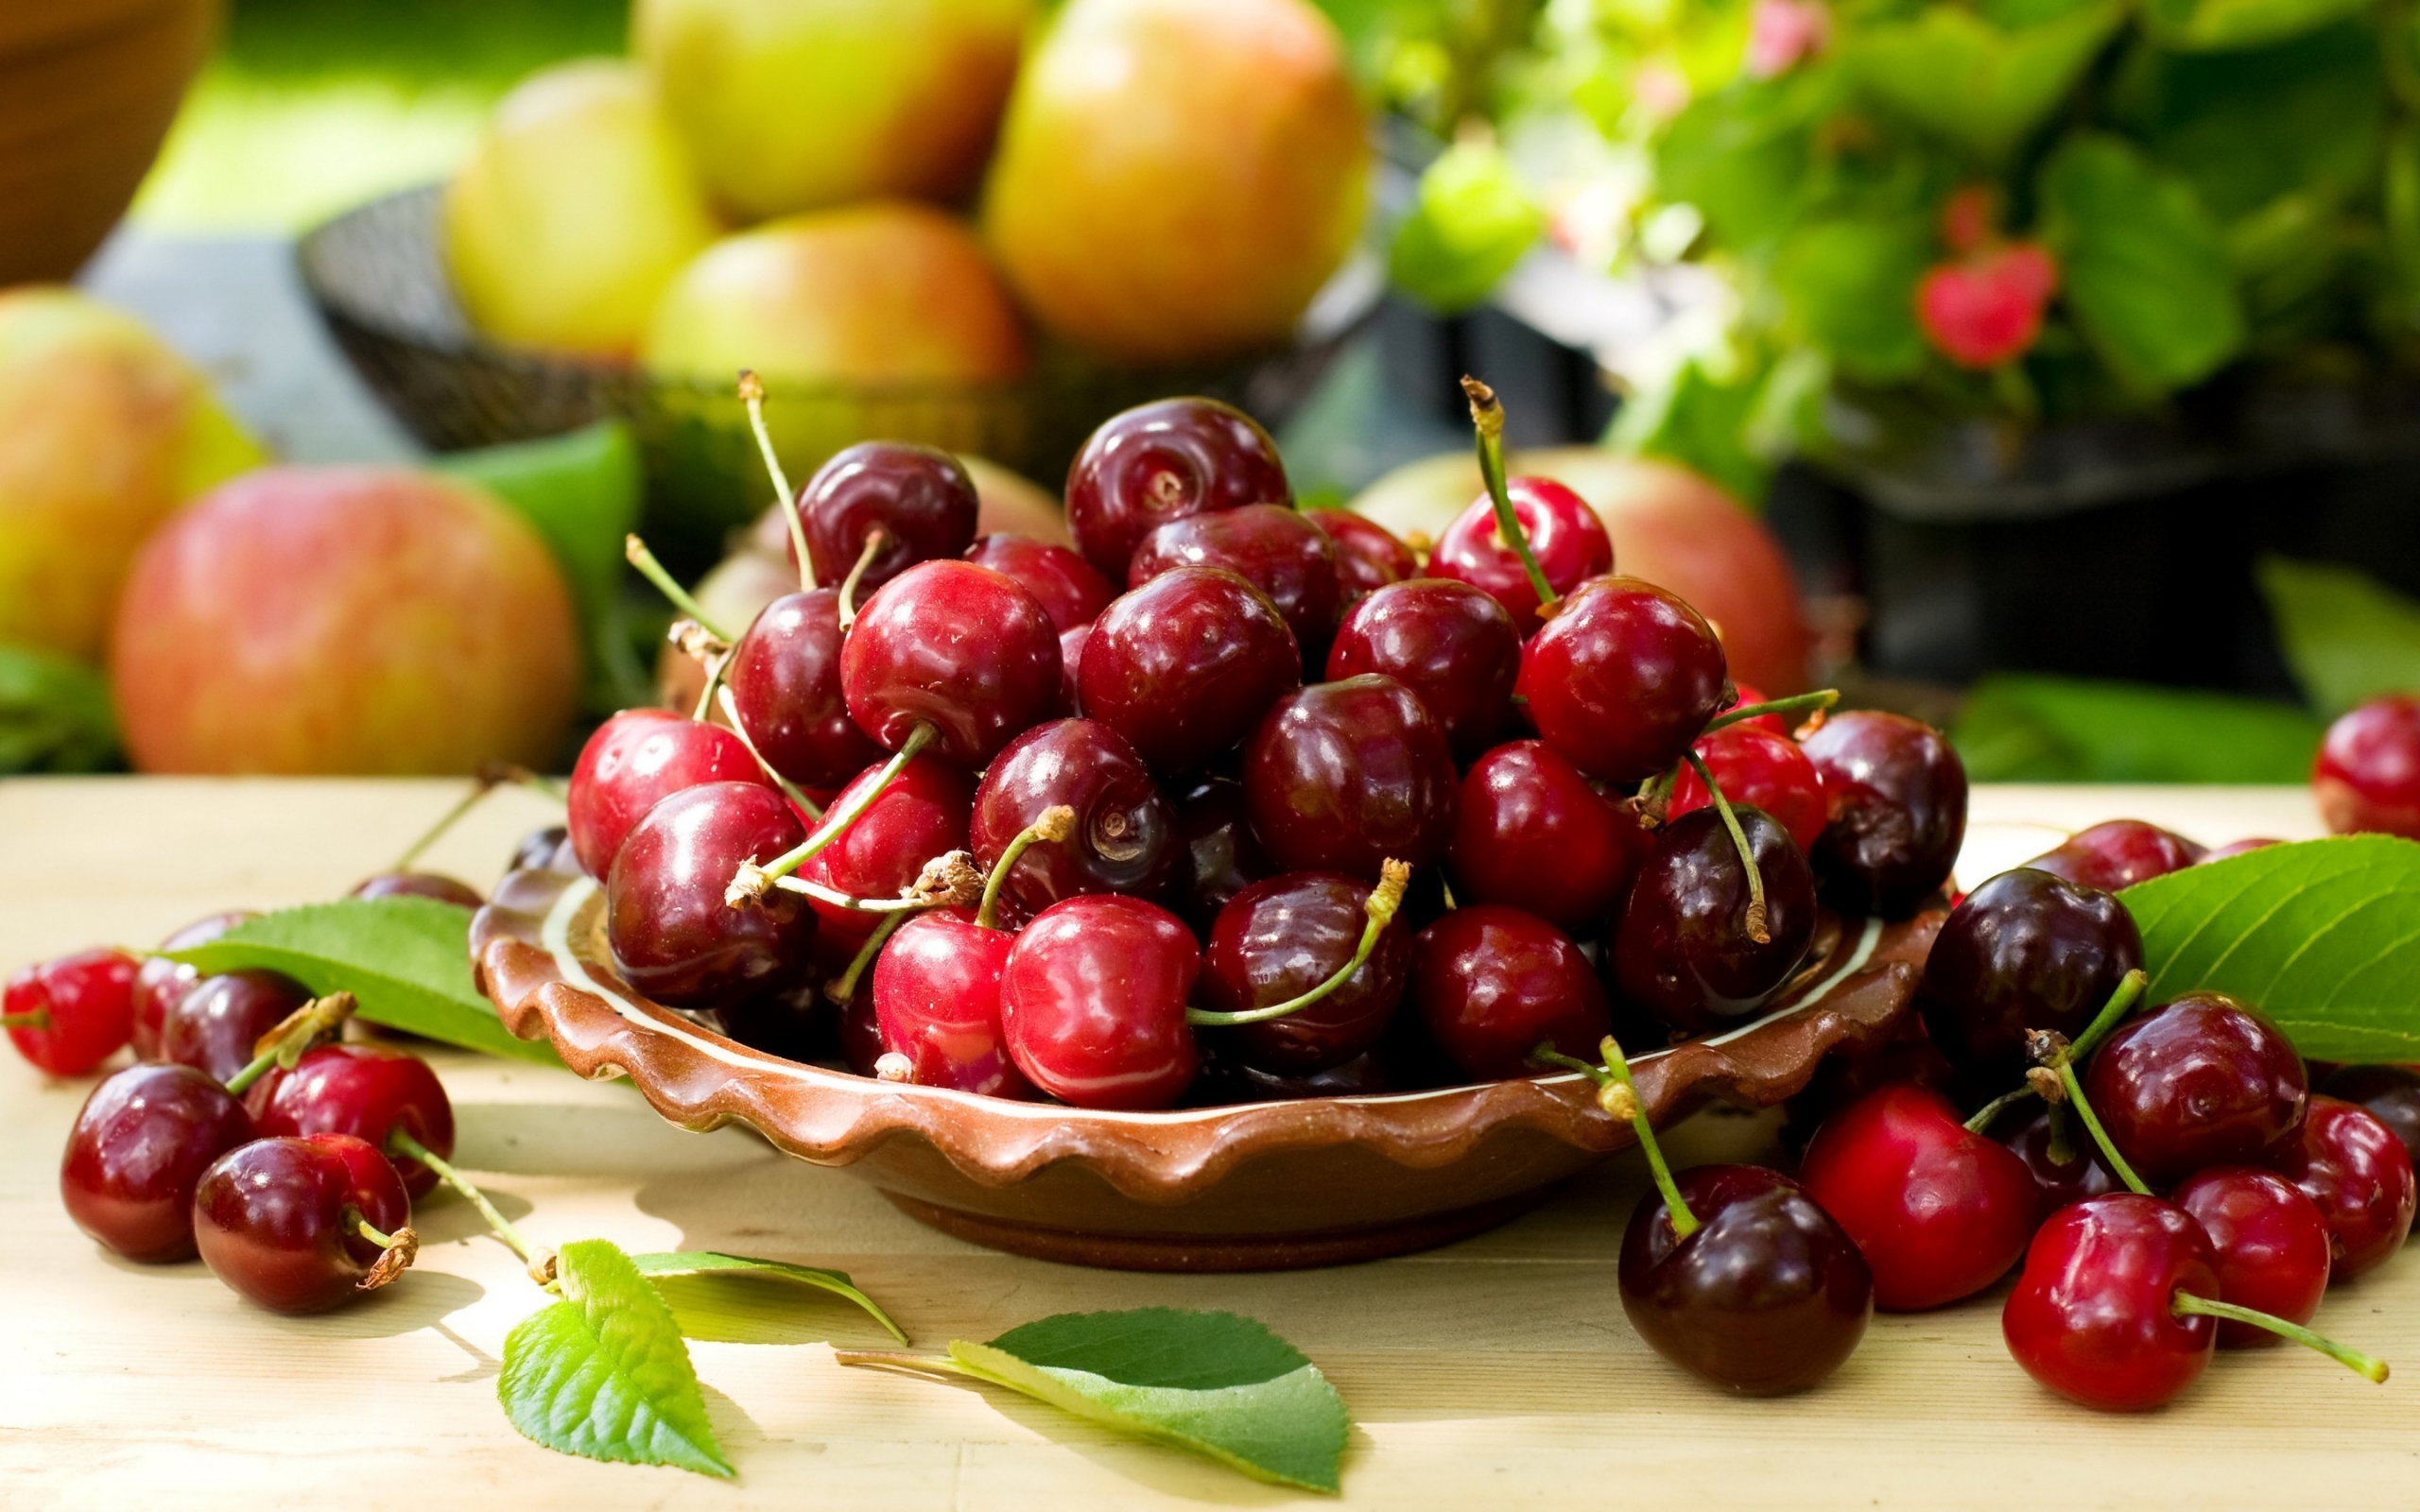 Bowl of Cherries for 2560 x 1600 widescreen resolution